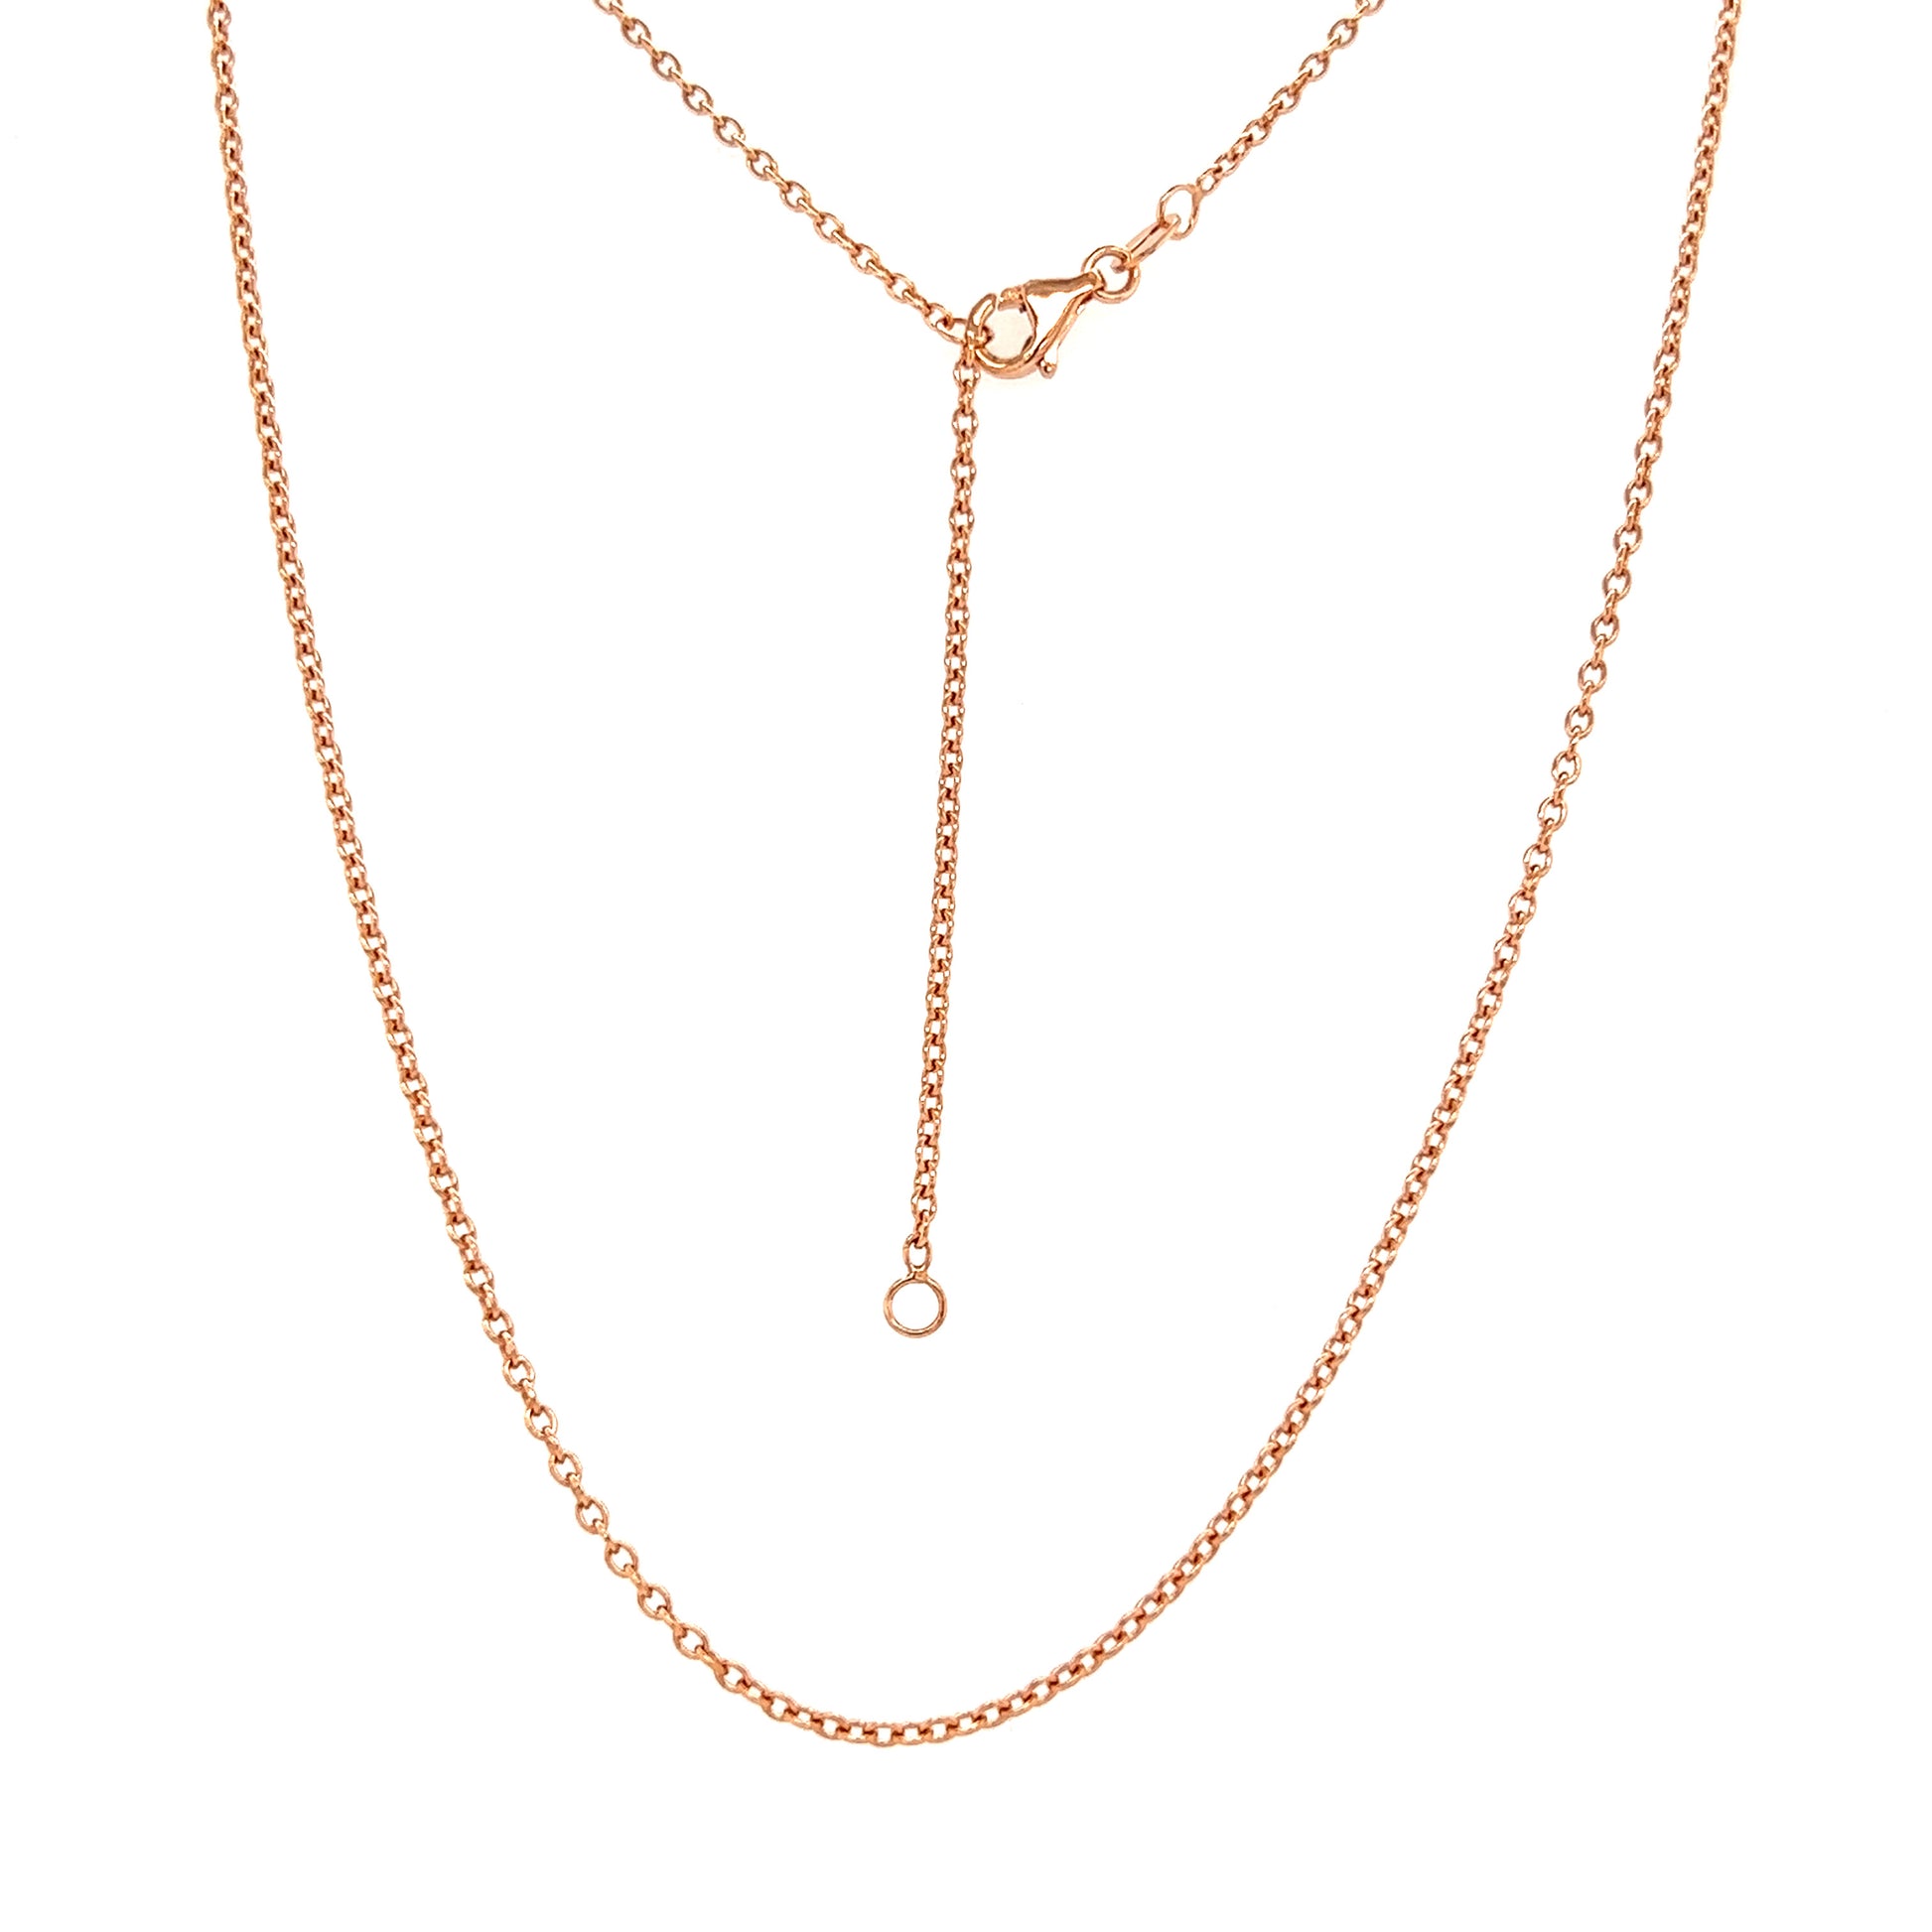 Cable Chain 1.5mm with Adjustable Length in 14K Rose Gold Adjustable Length View